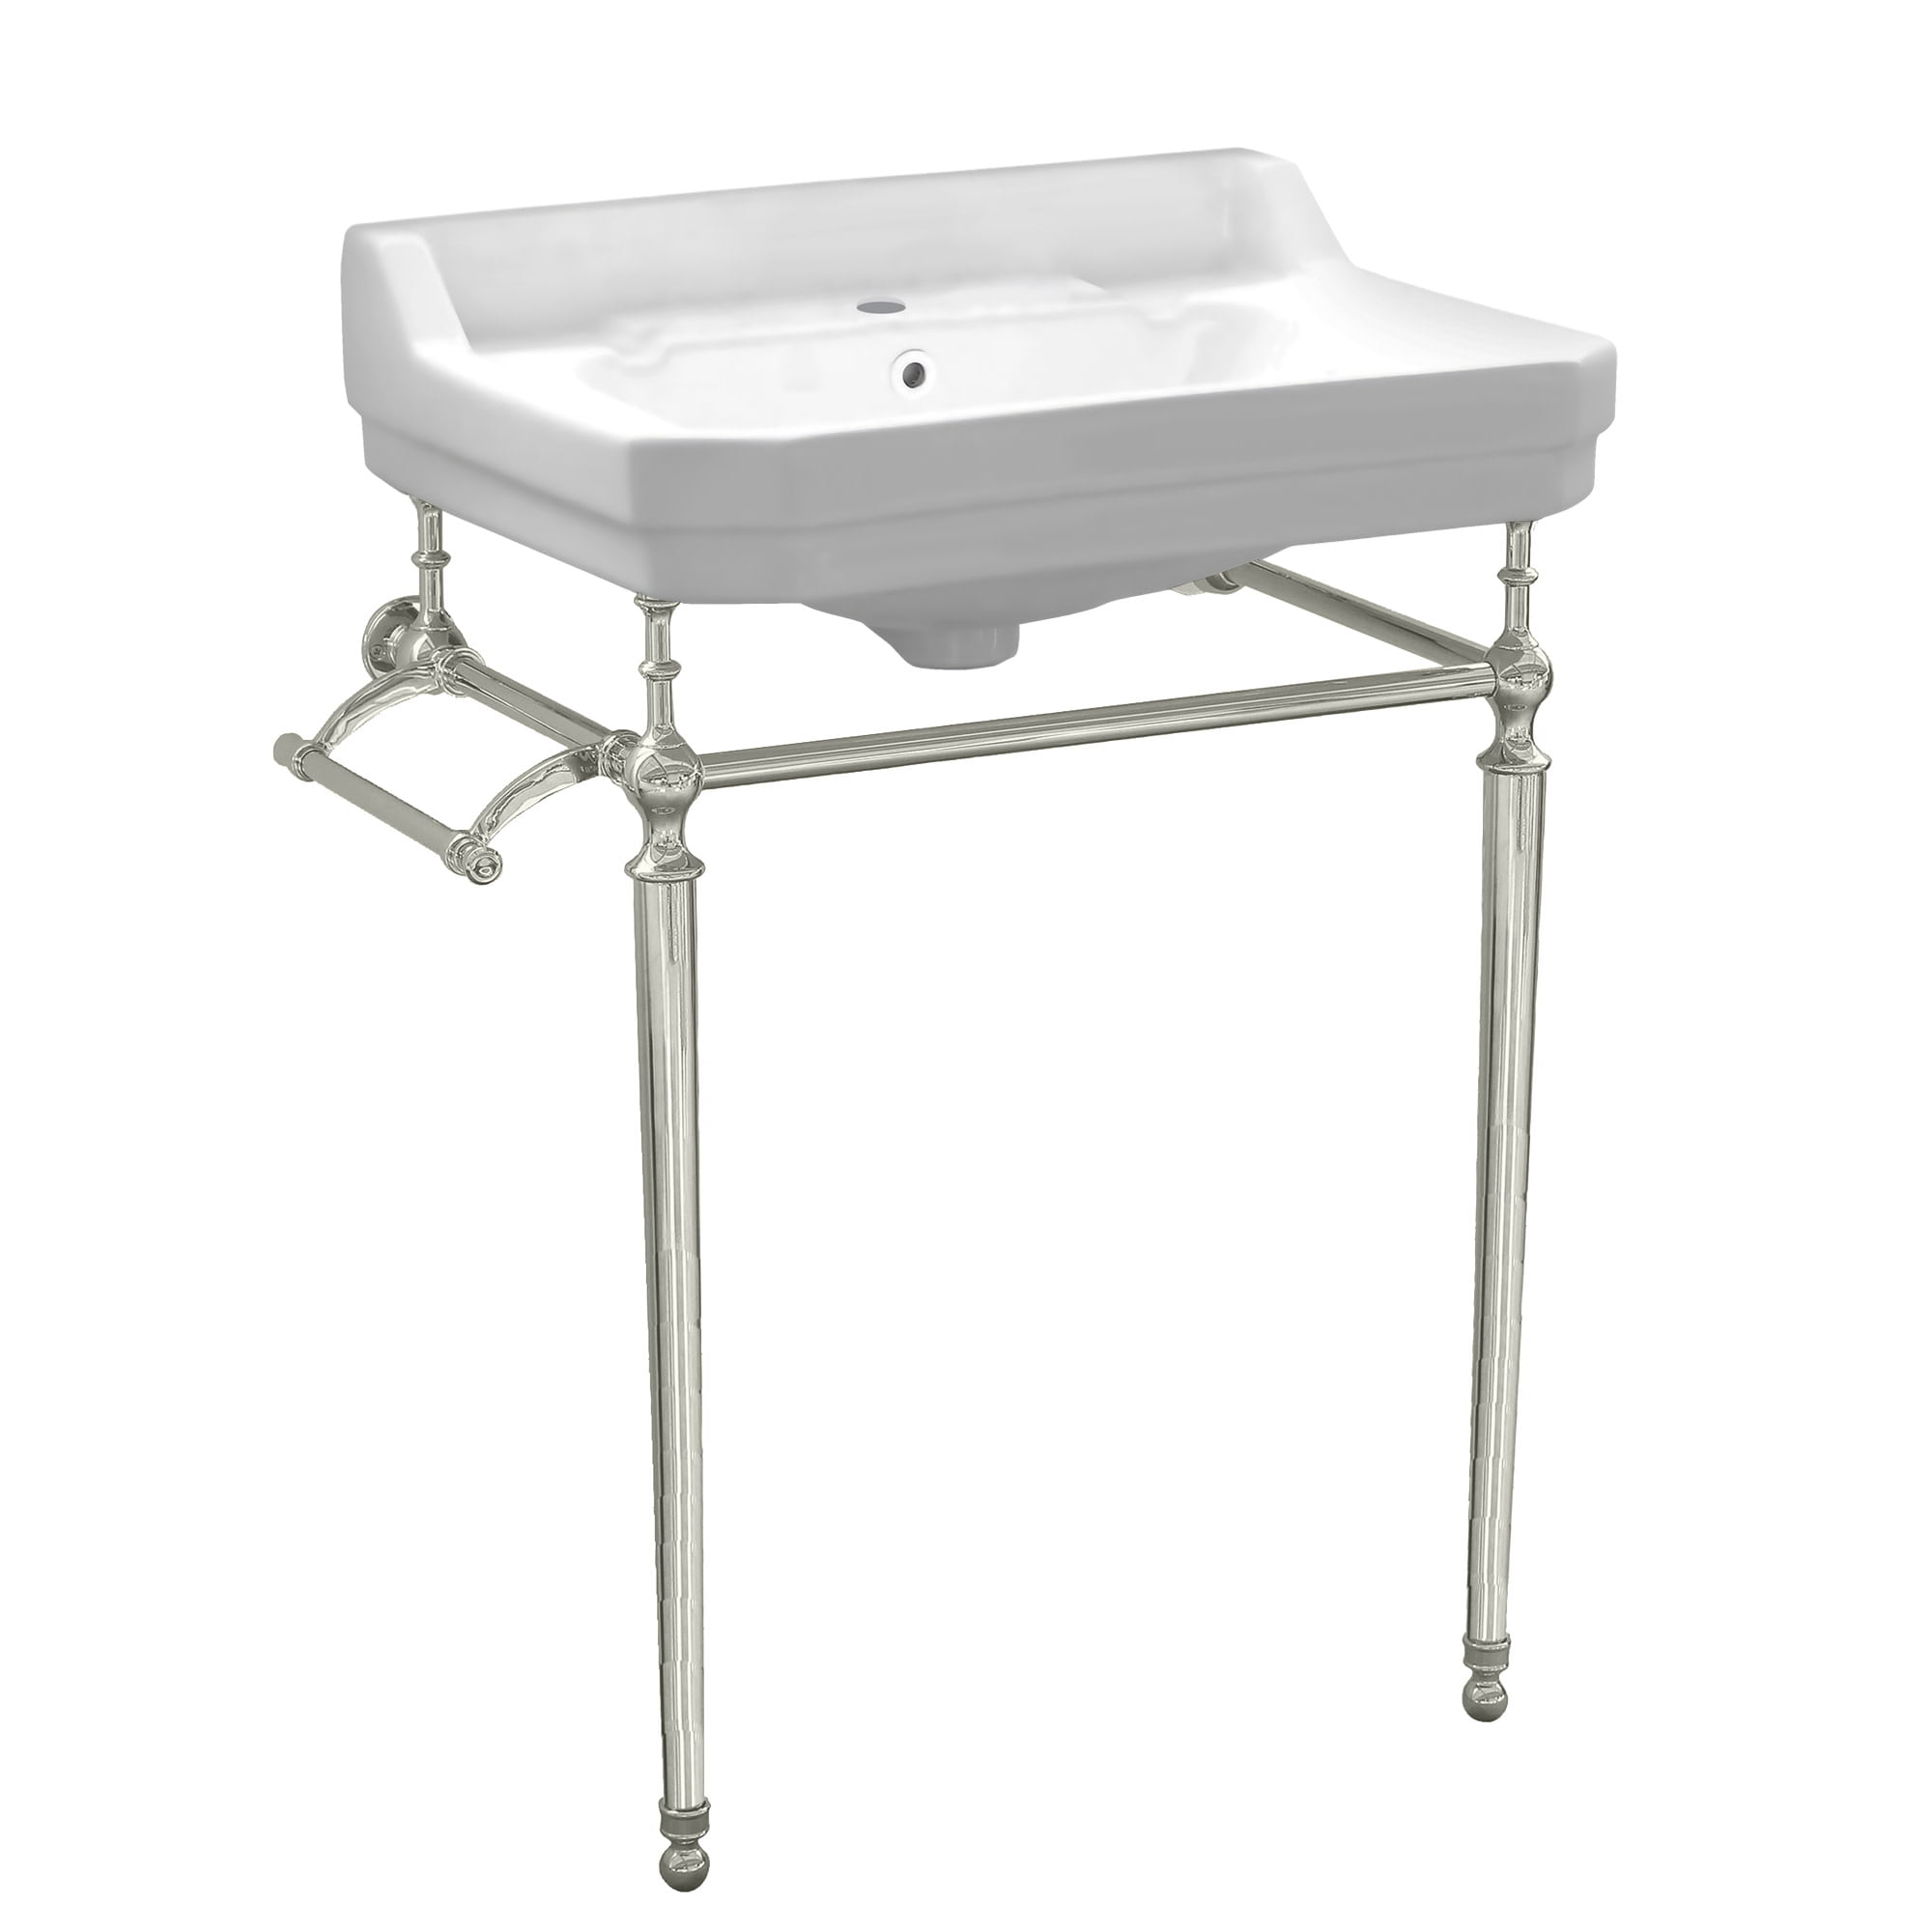 Whv024-l33-1h-pn Victoriahaus Console With Integrated Rectangular Bowl - Polished Nickel